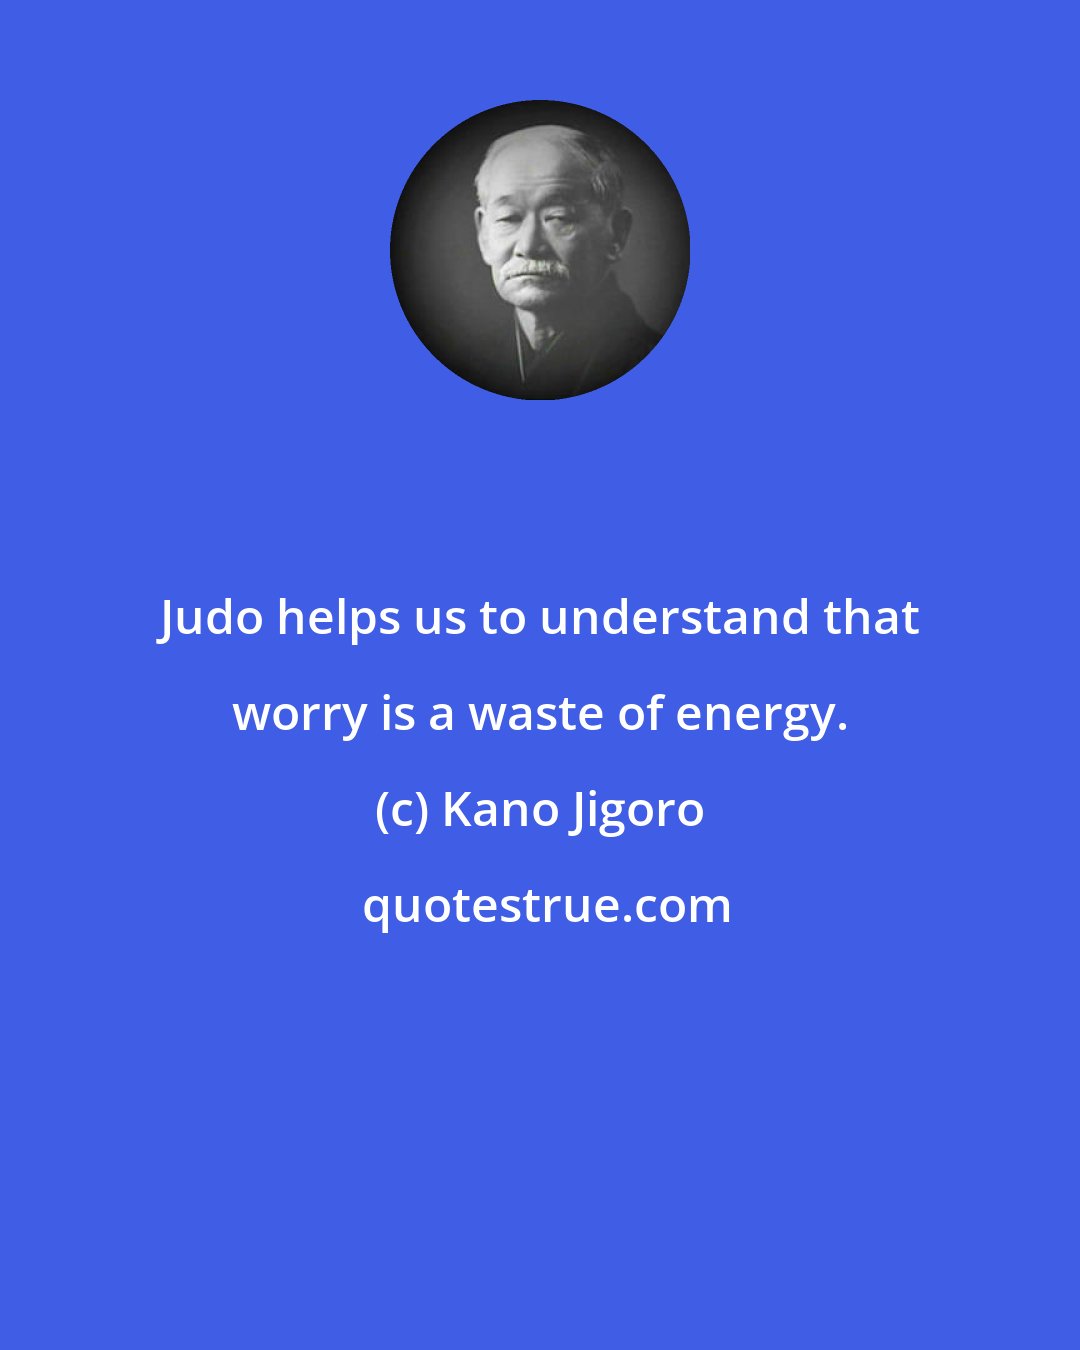 Kano Jigoro: Judo helps us to understand that worry is a waste of energy.